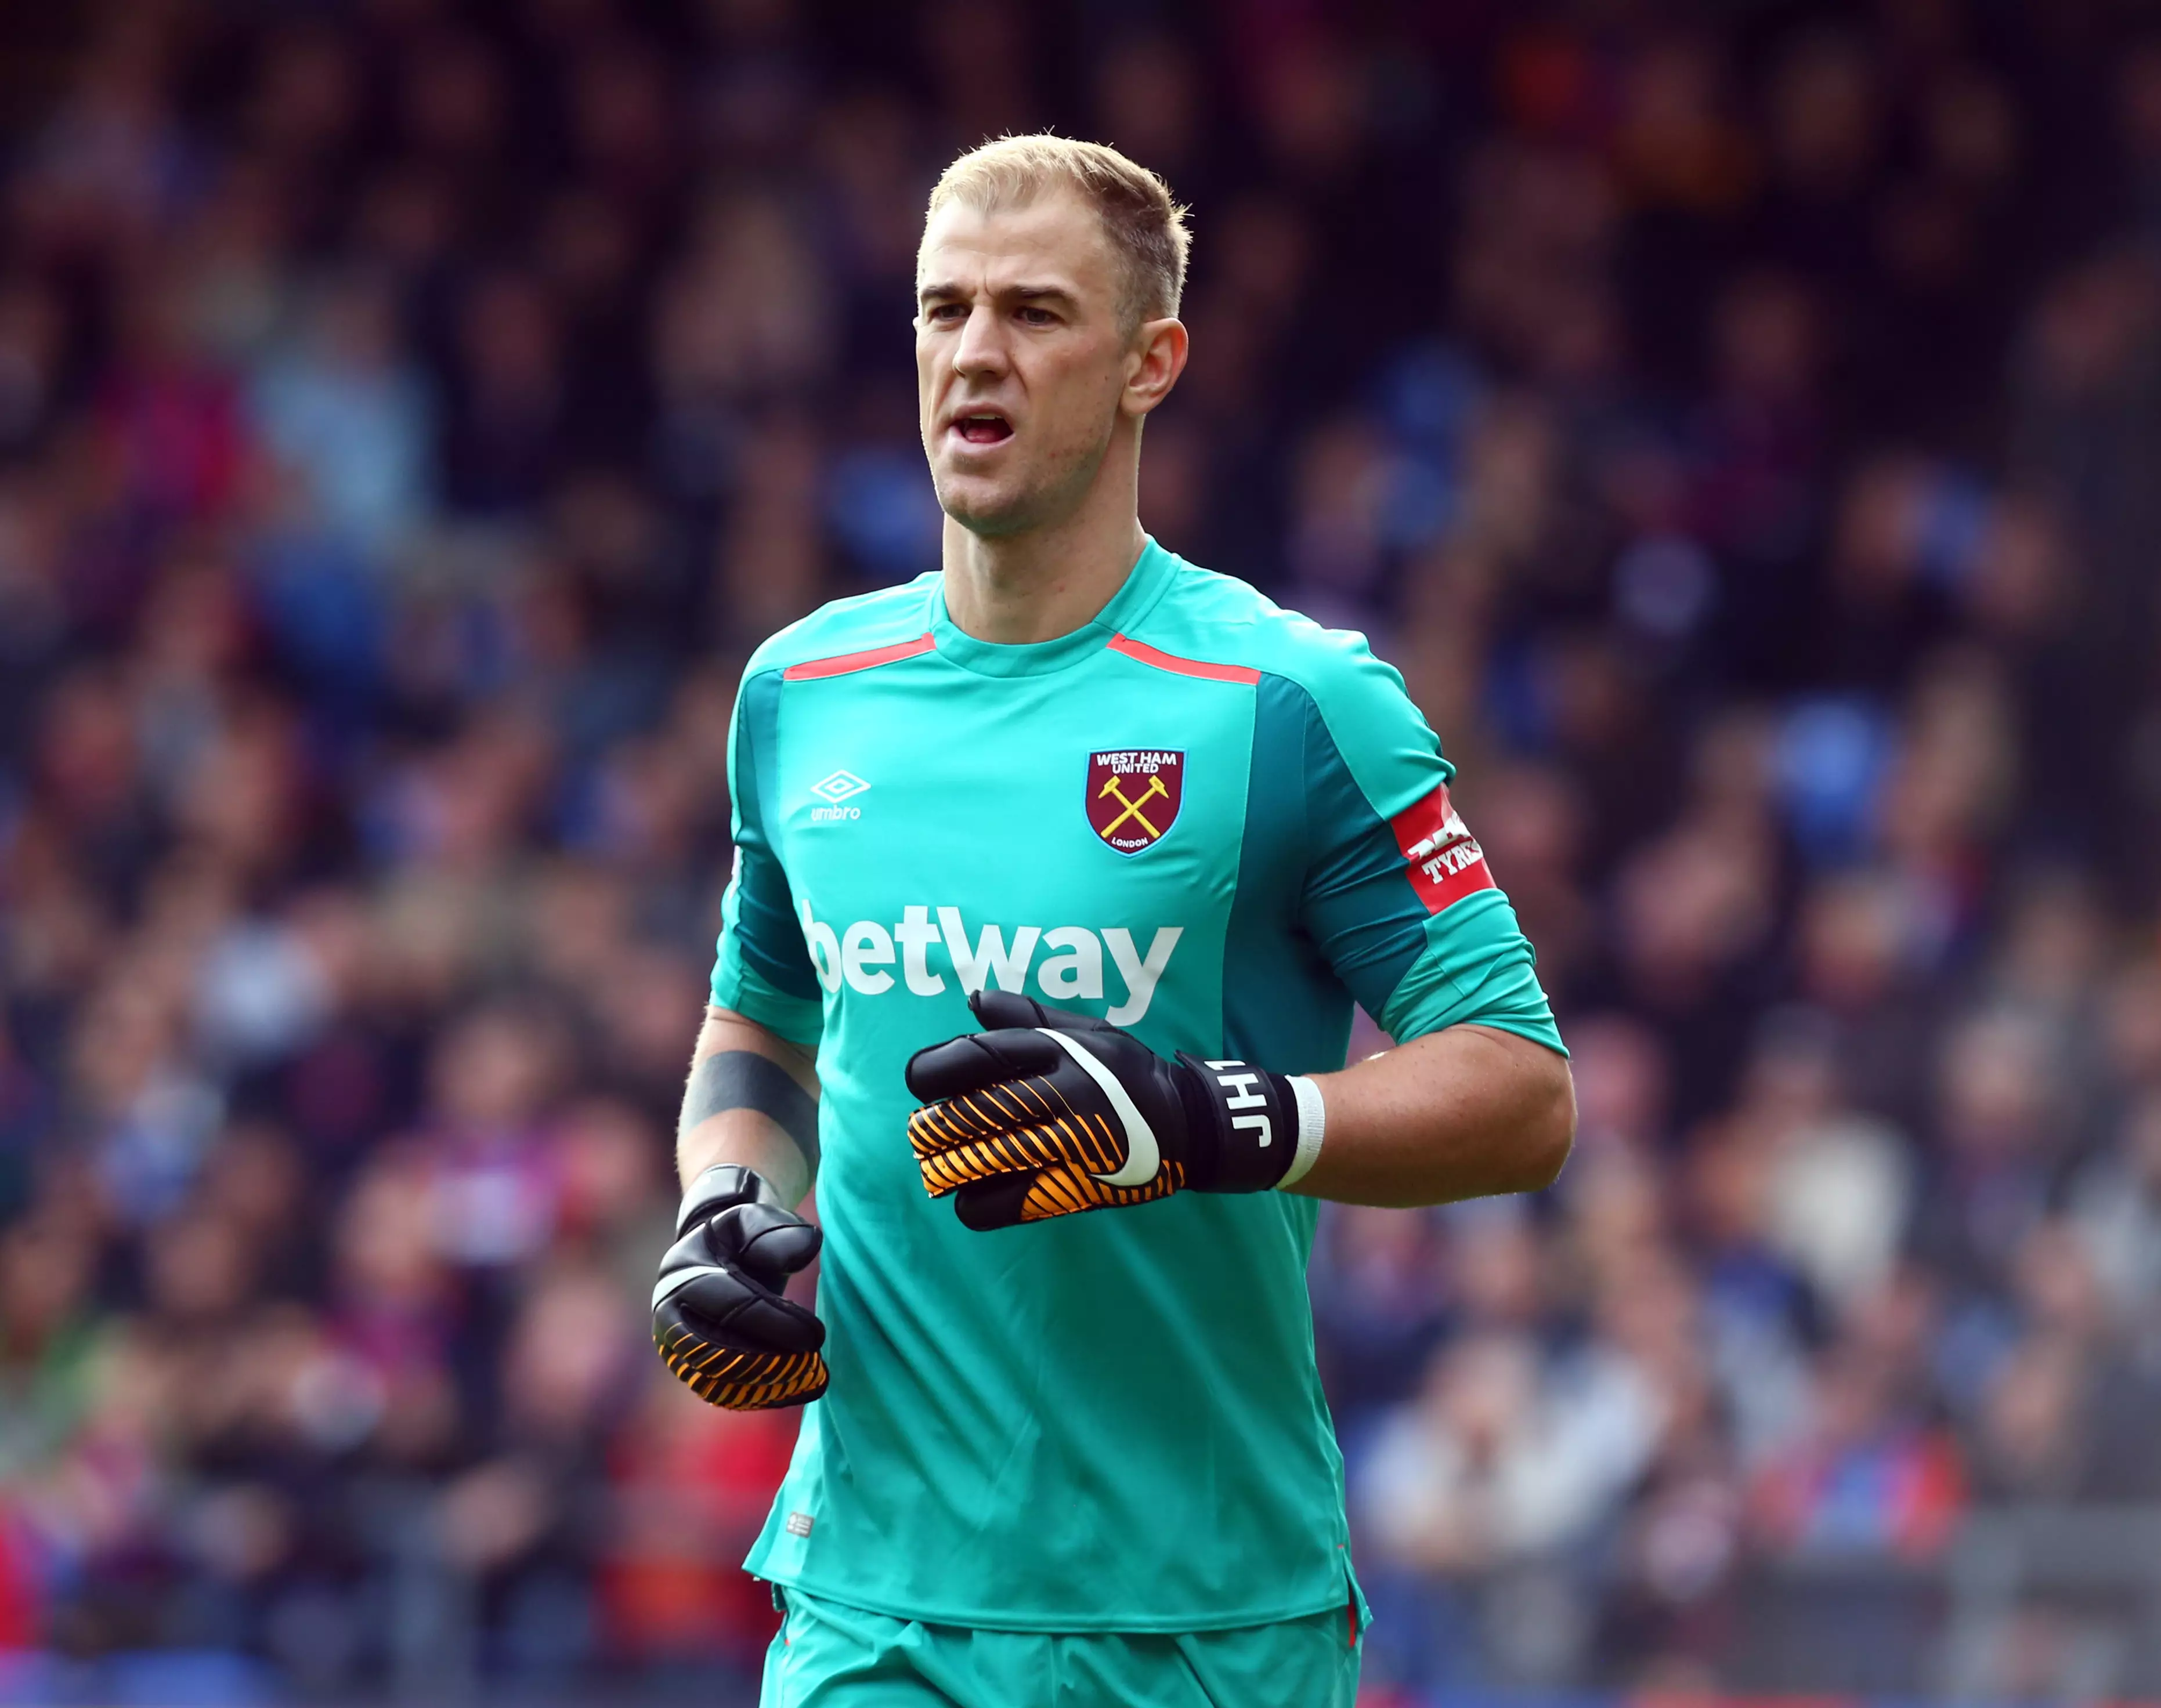 Hart hasn't exactly had the best couple of seasons. Image: PA Images